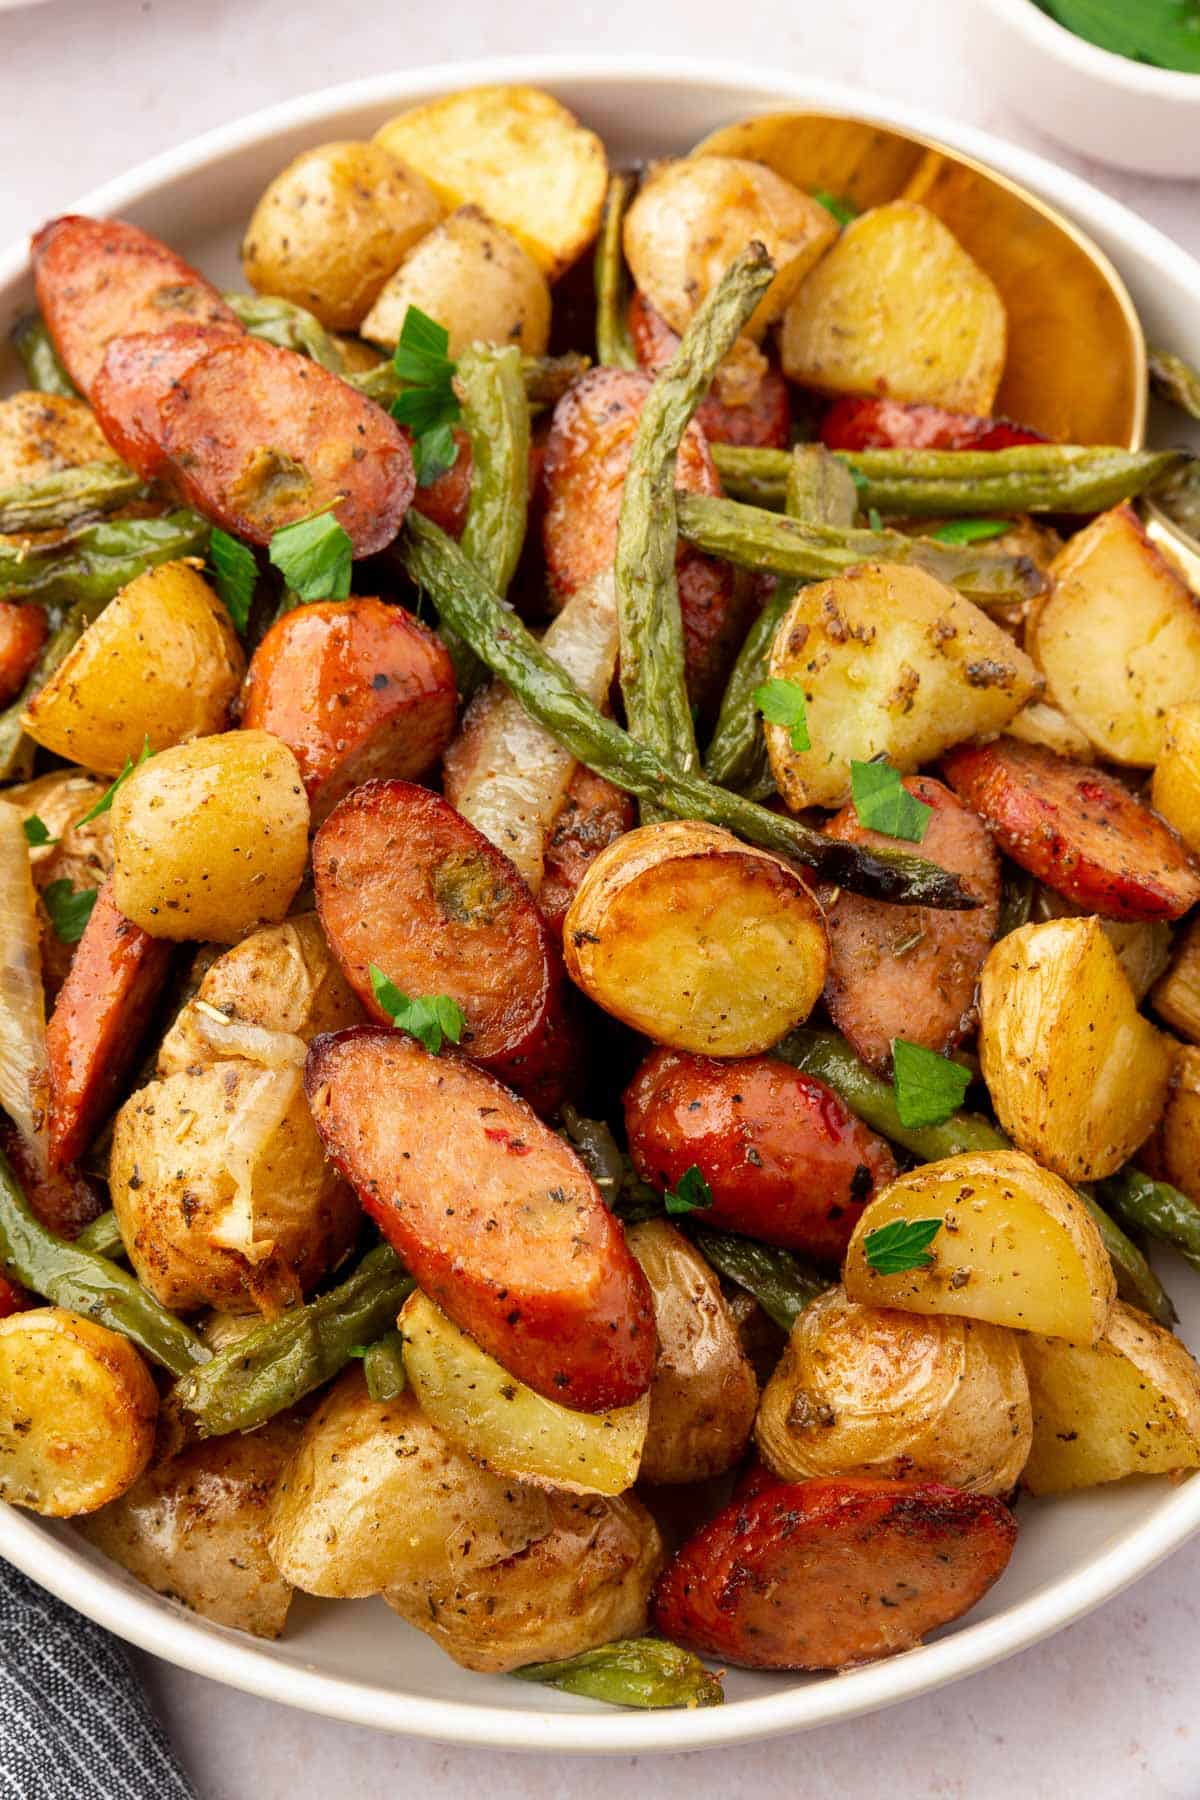 Roasted sausage, green beans, onions, and potatoes in a serving bowl.